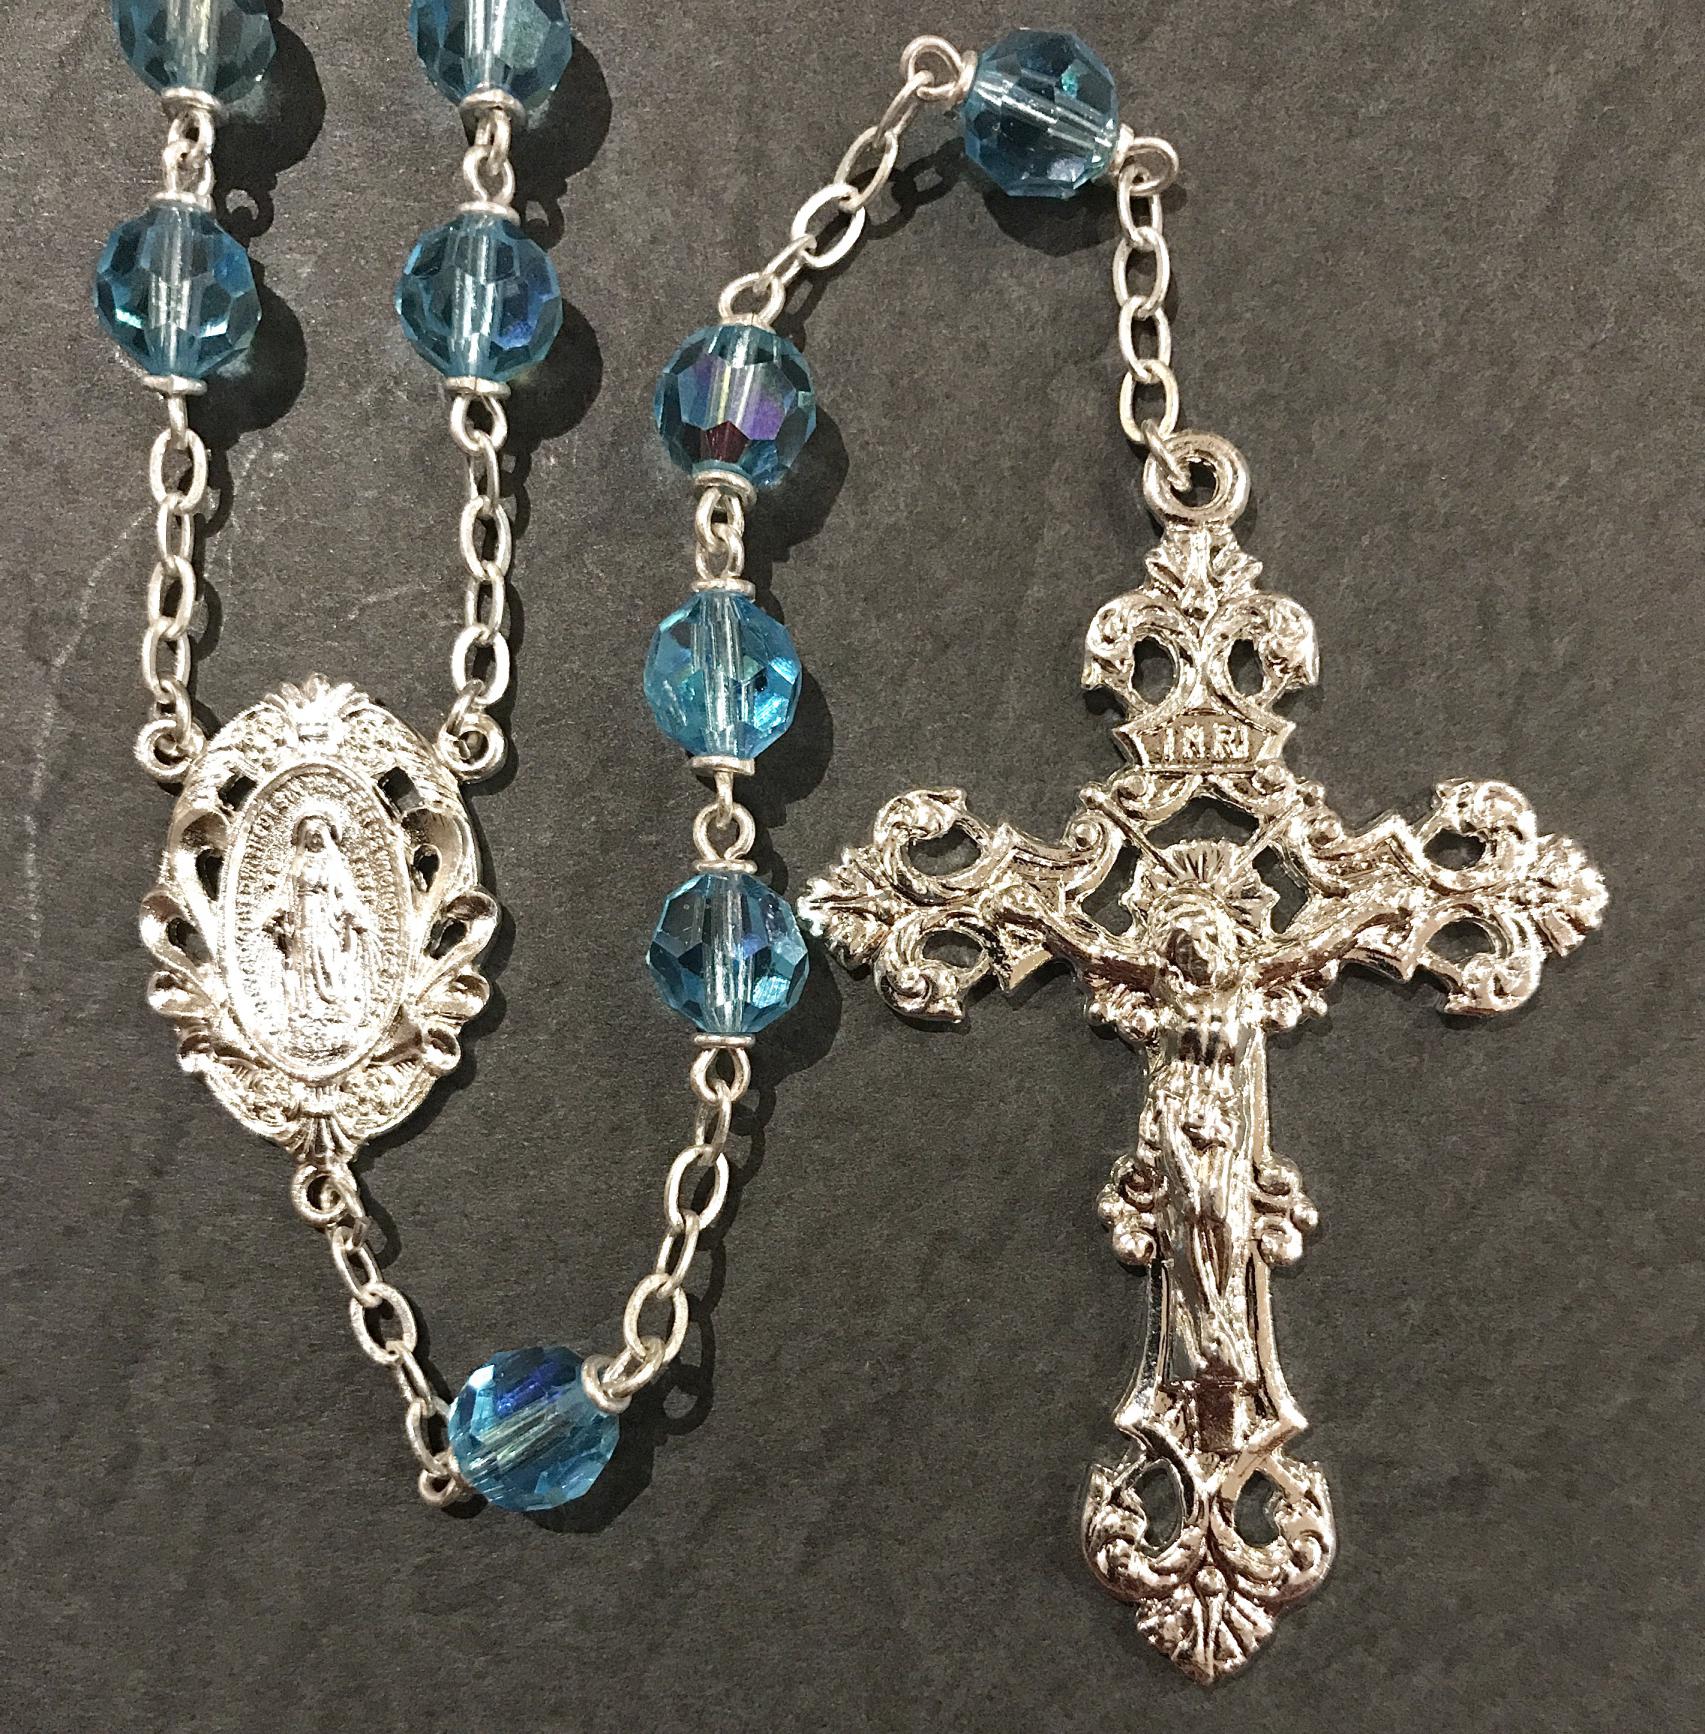 7mm AQUA TIN CUT AB ROSARY WITH STERLING SILVER PLATED CRUCIFIX, CENTER, WIRE, CHAIN GIFT BOXED